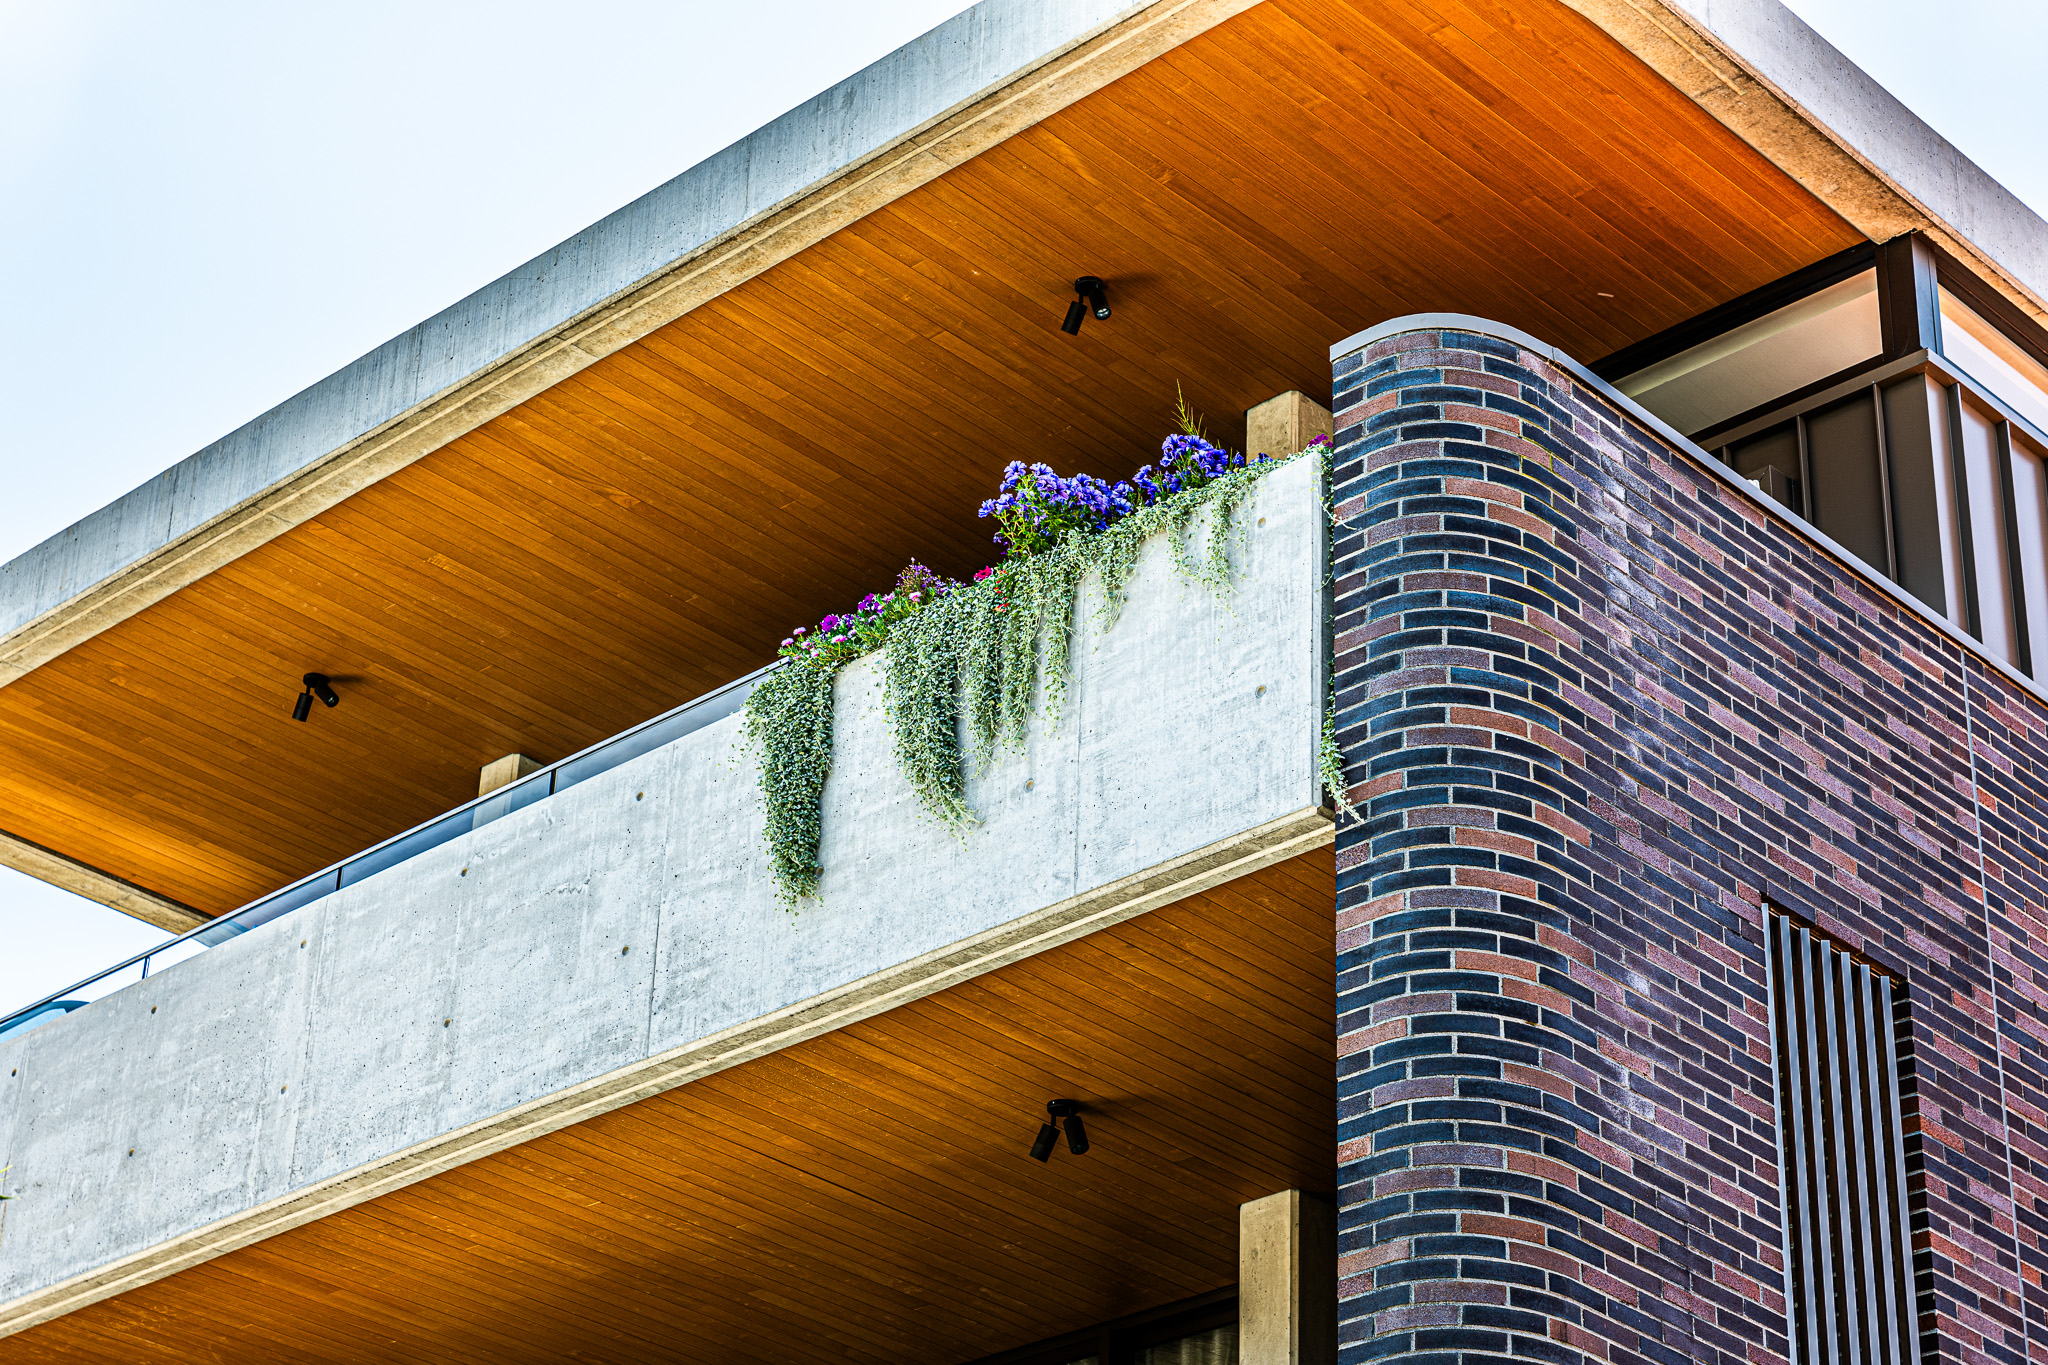 A balcony of a house from below, some plants hanging over the edge,